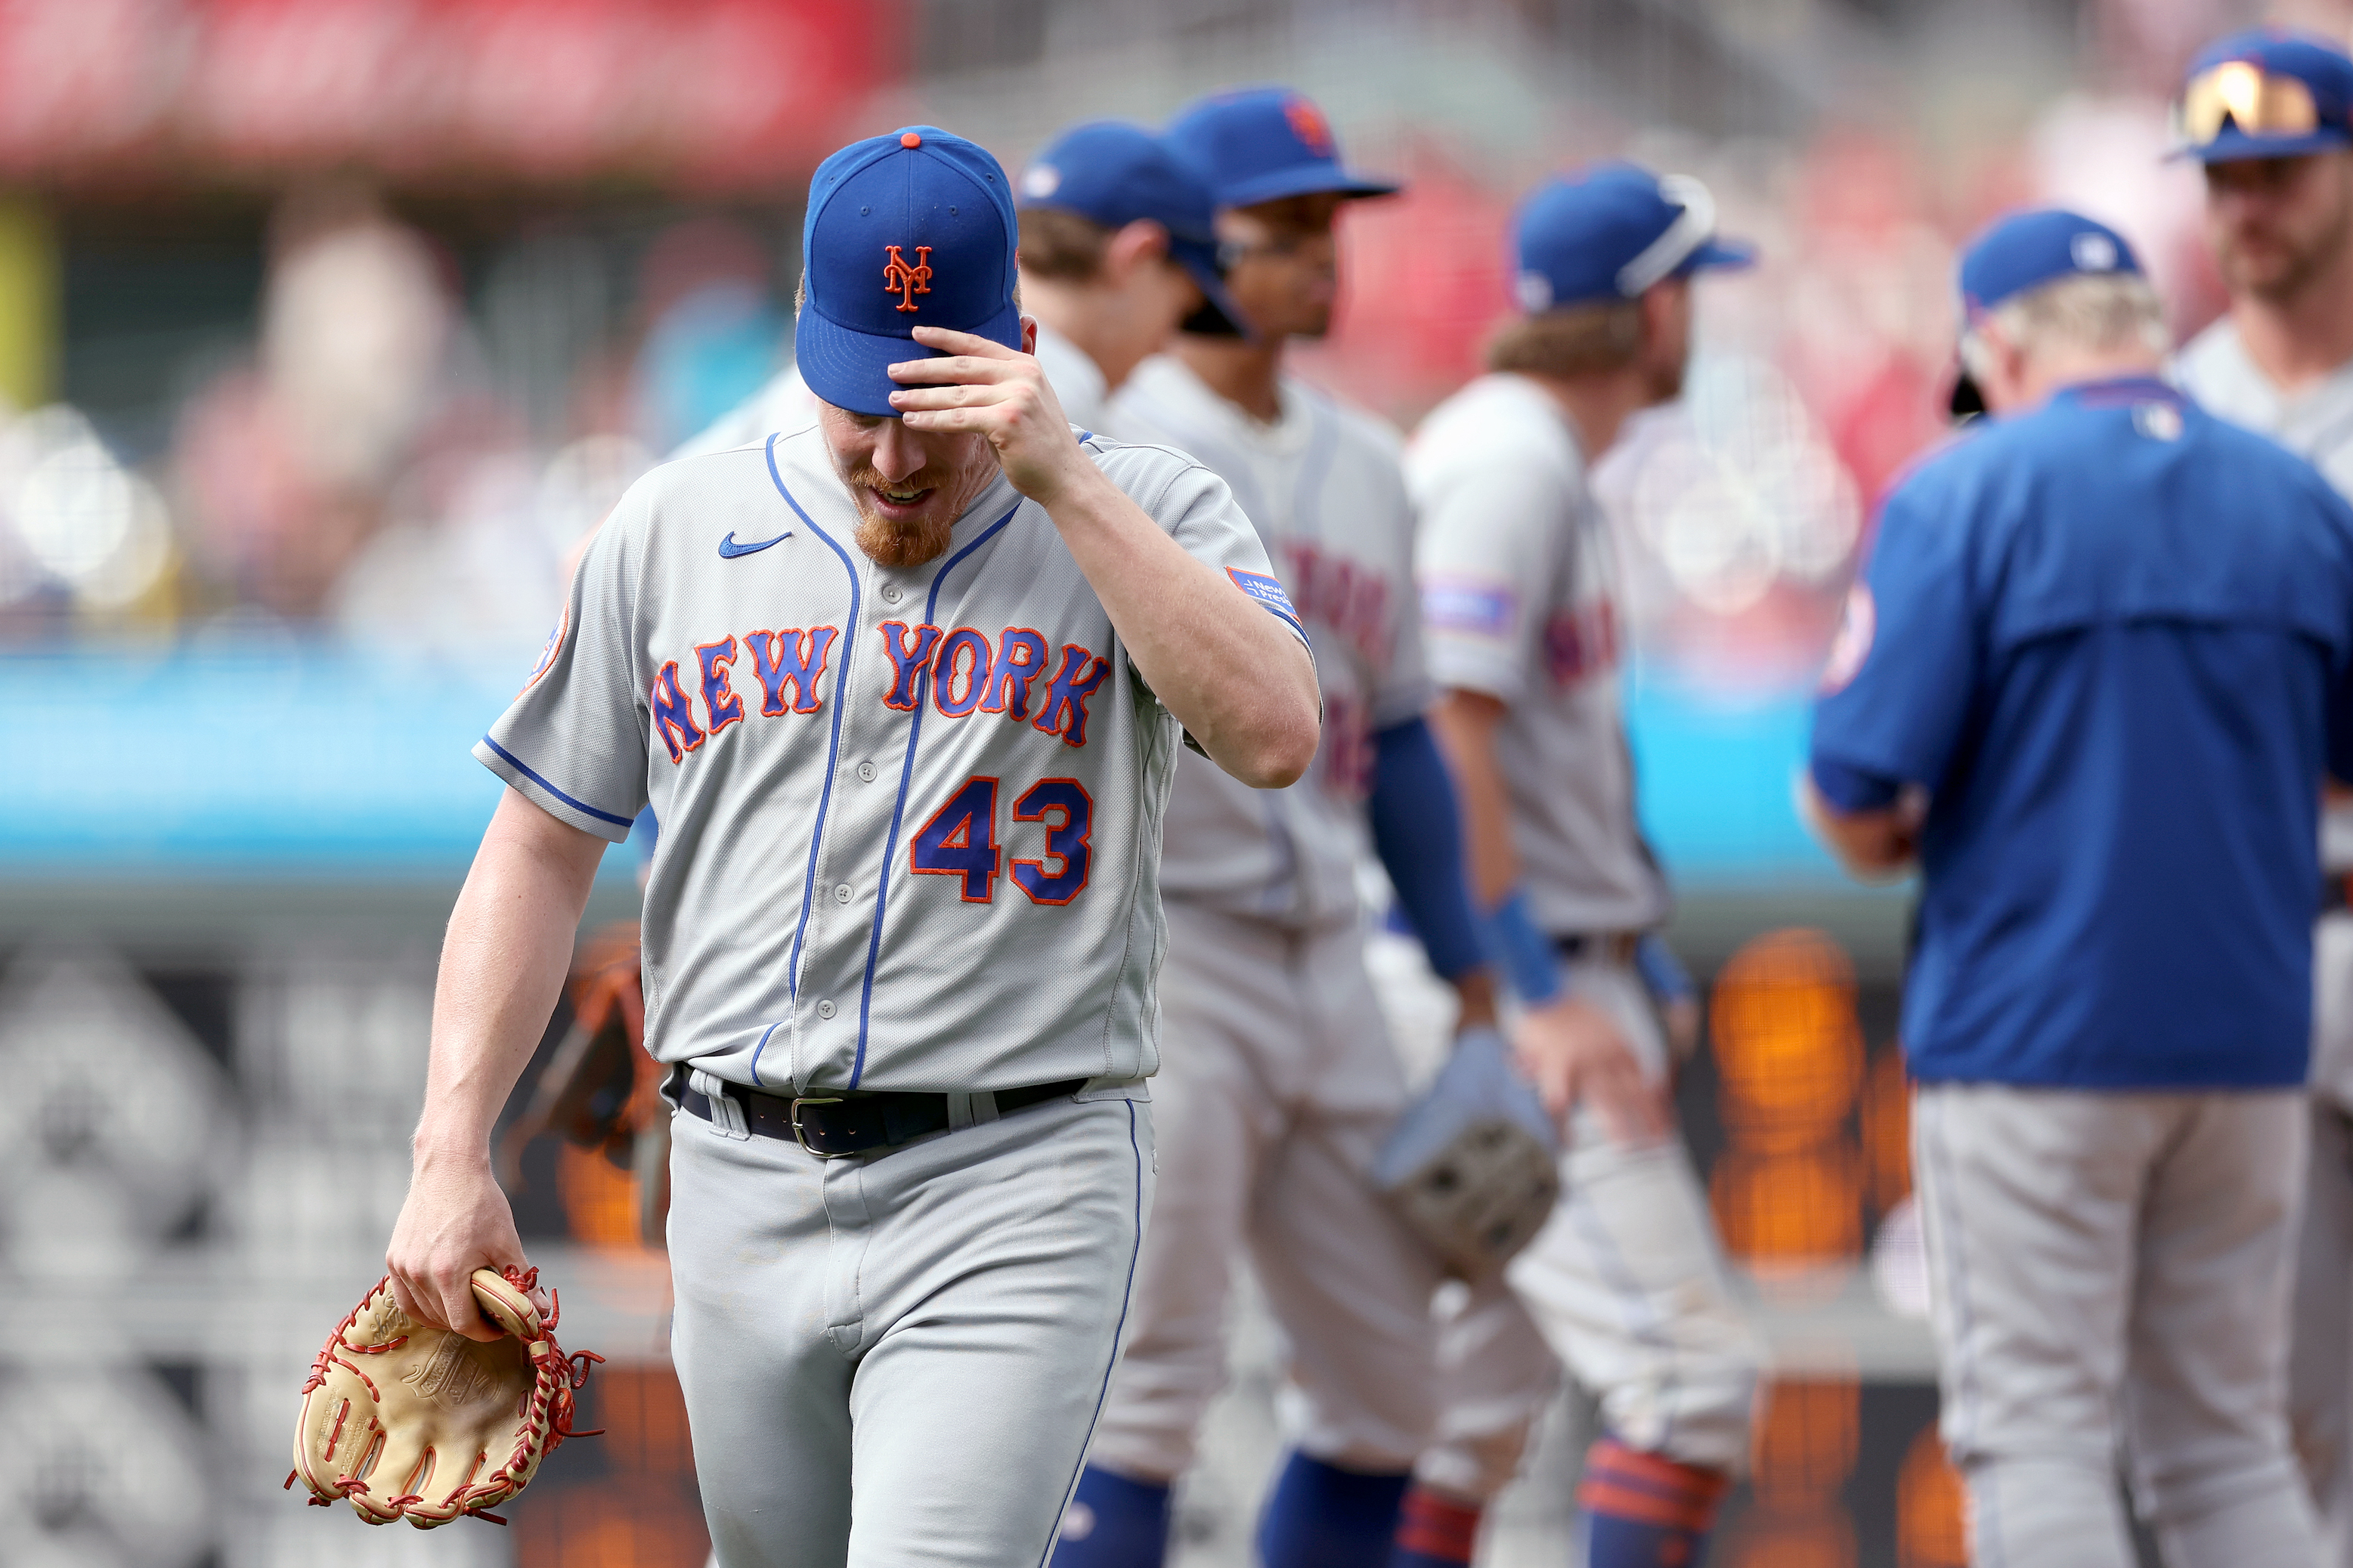 Reliever Jeff Brigham leaves the mound after hitting two straight batters to plate the winning run in a Mets loss against the Phillies.